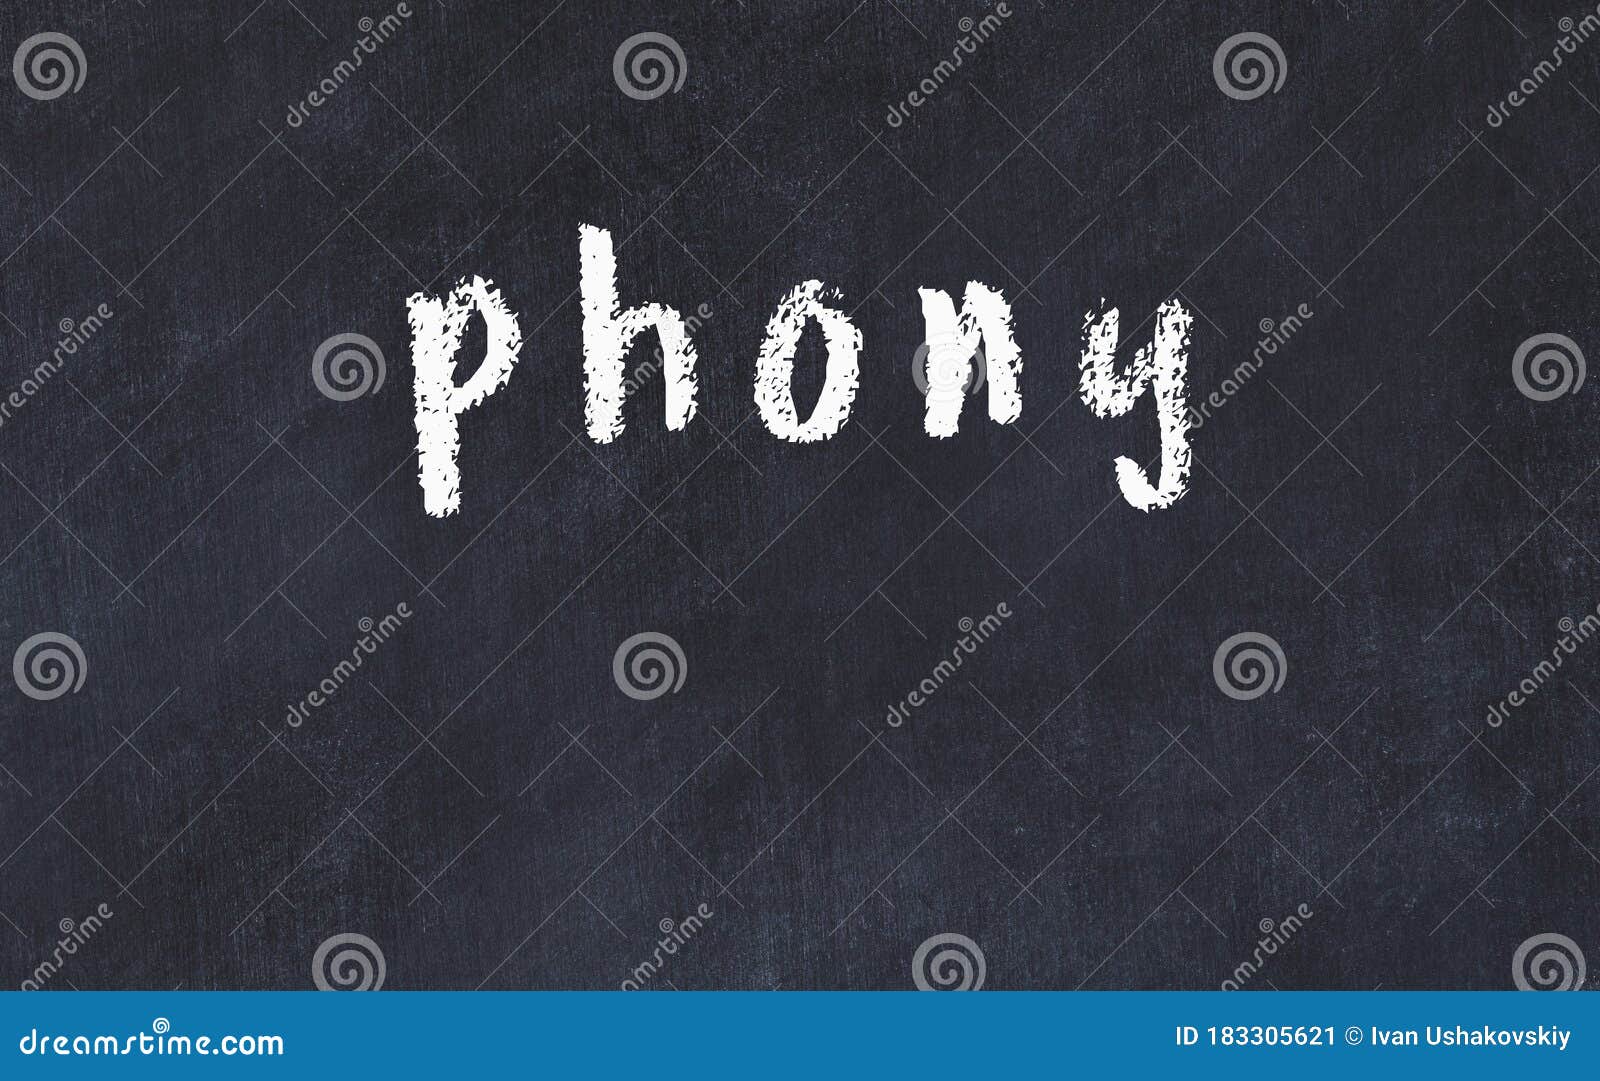 college chalk desk with the word phony written on in